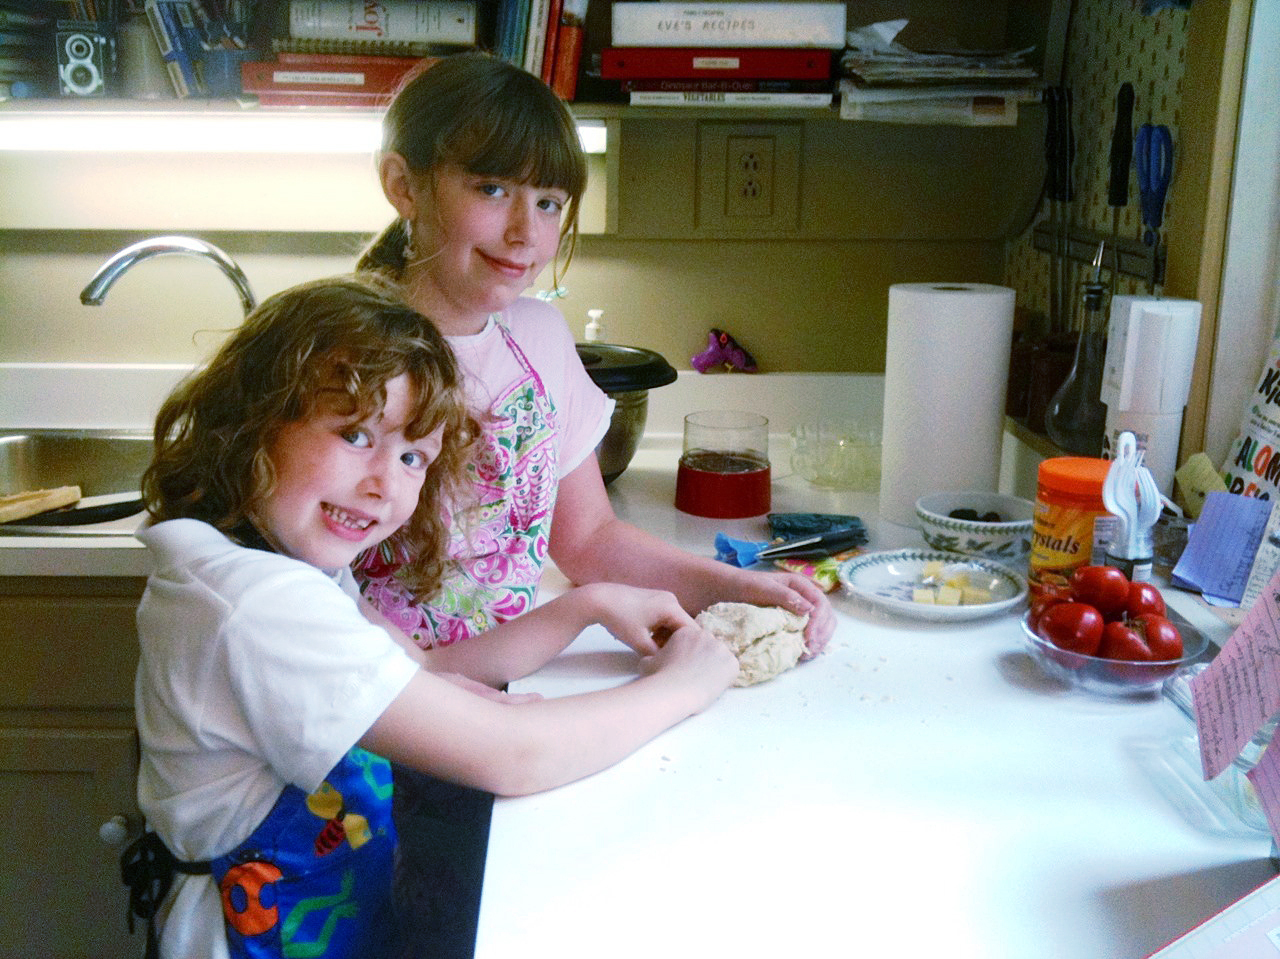 Eve Schaub says her daughters were "less than enthusiastic" at first about the family's no-sugar-for-a-year experiment. But over time they learned to enjoy sugar-free baking. Photo: Courtesy of Eve O. Schaub